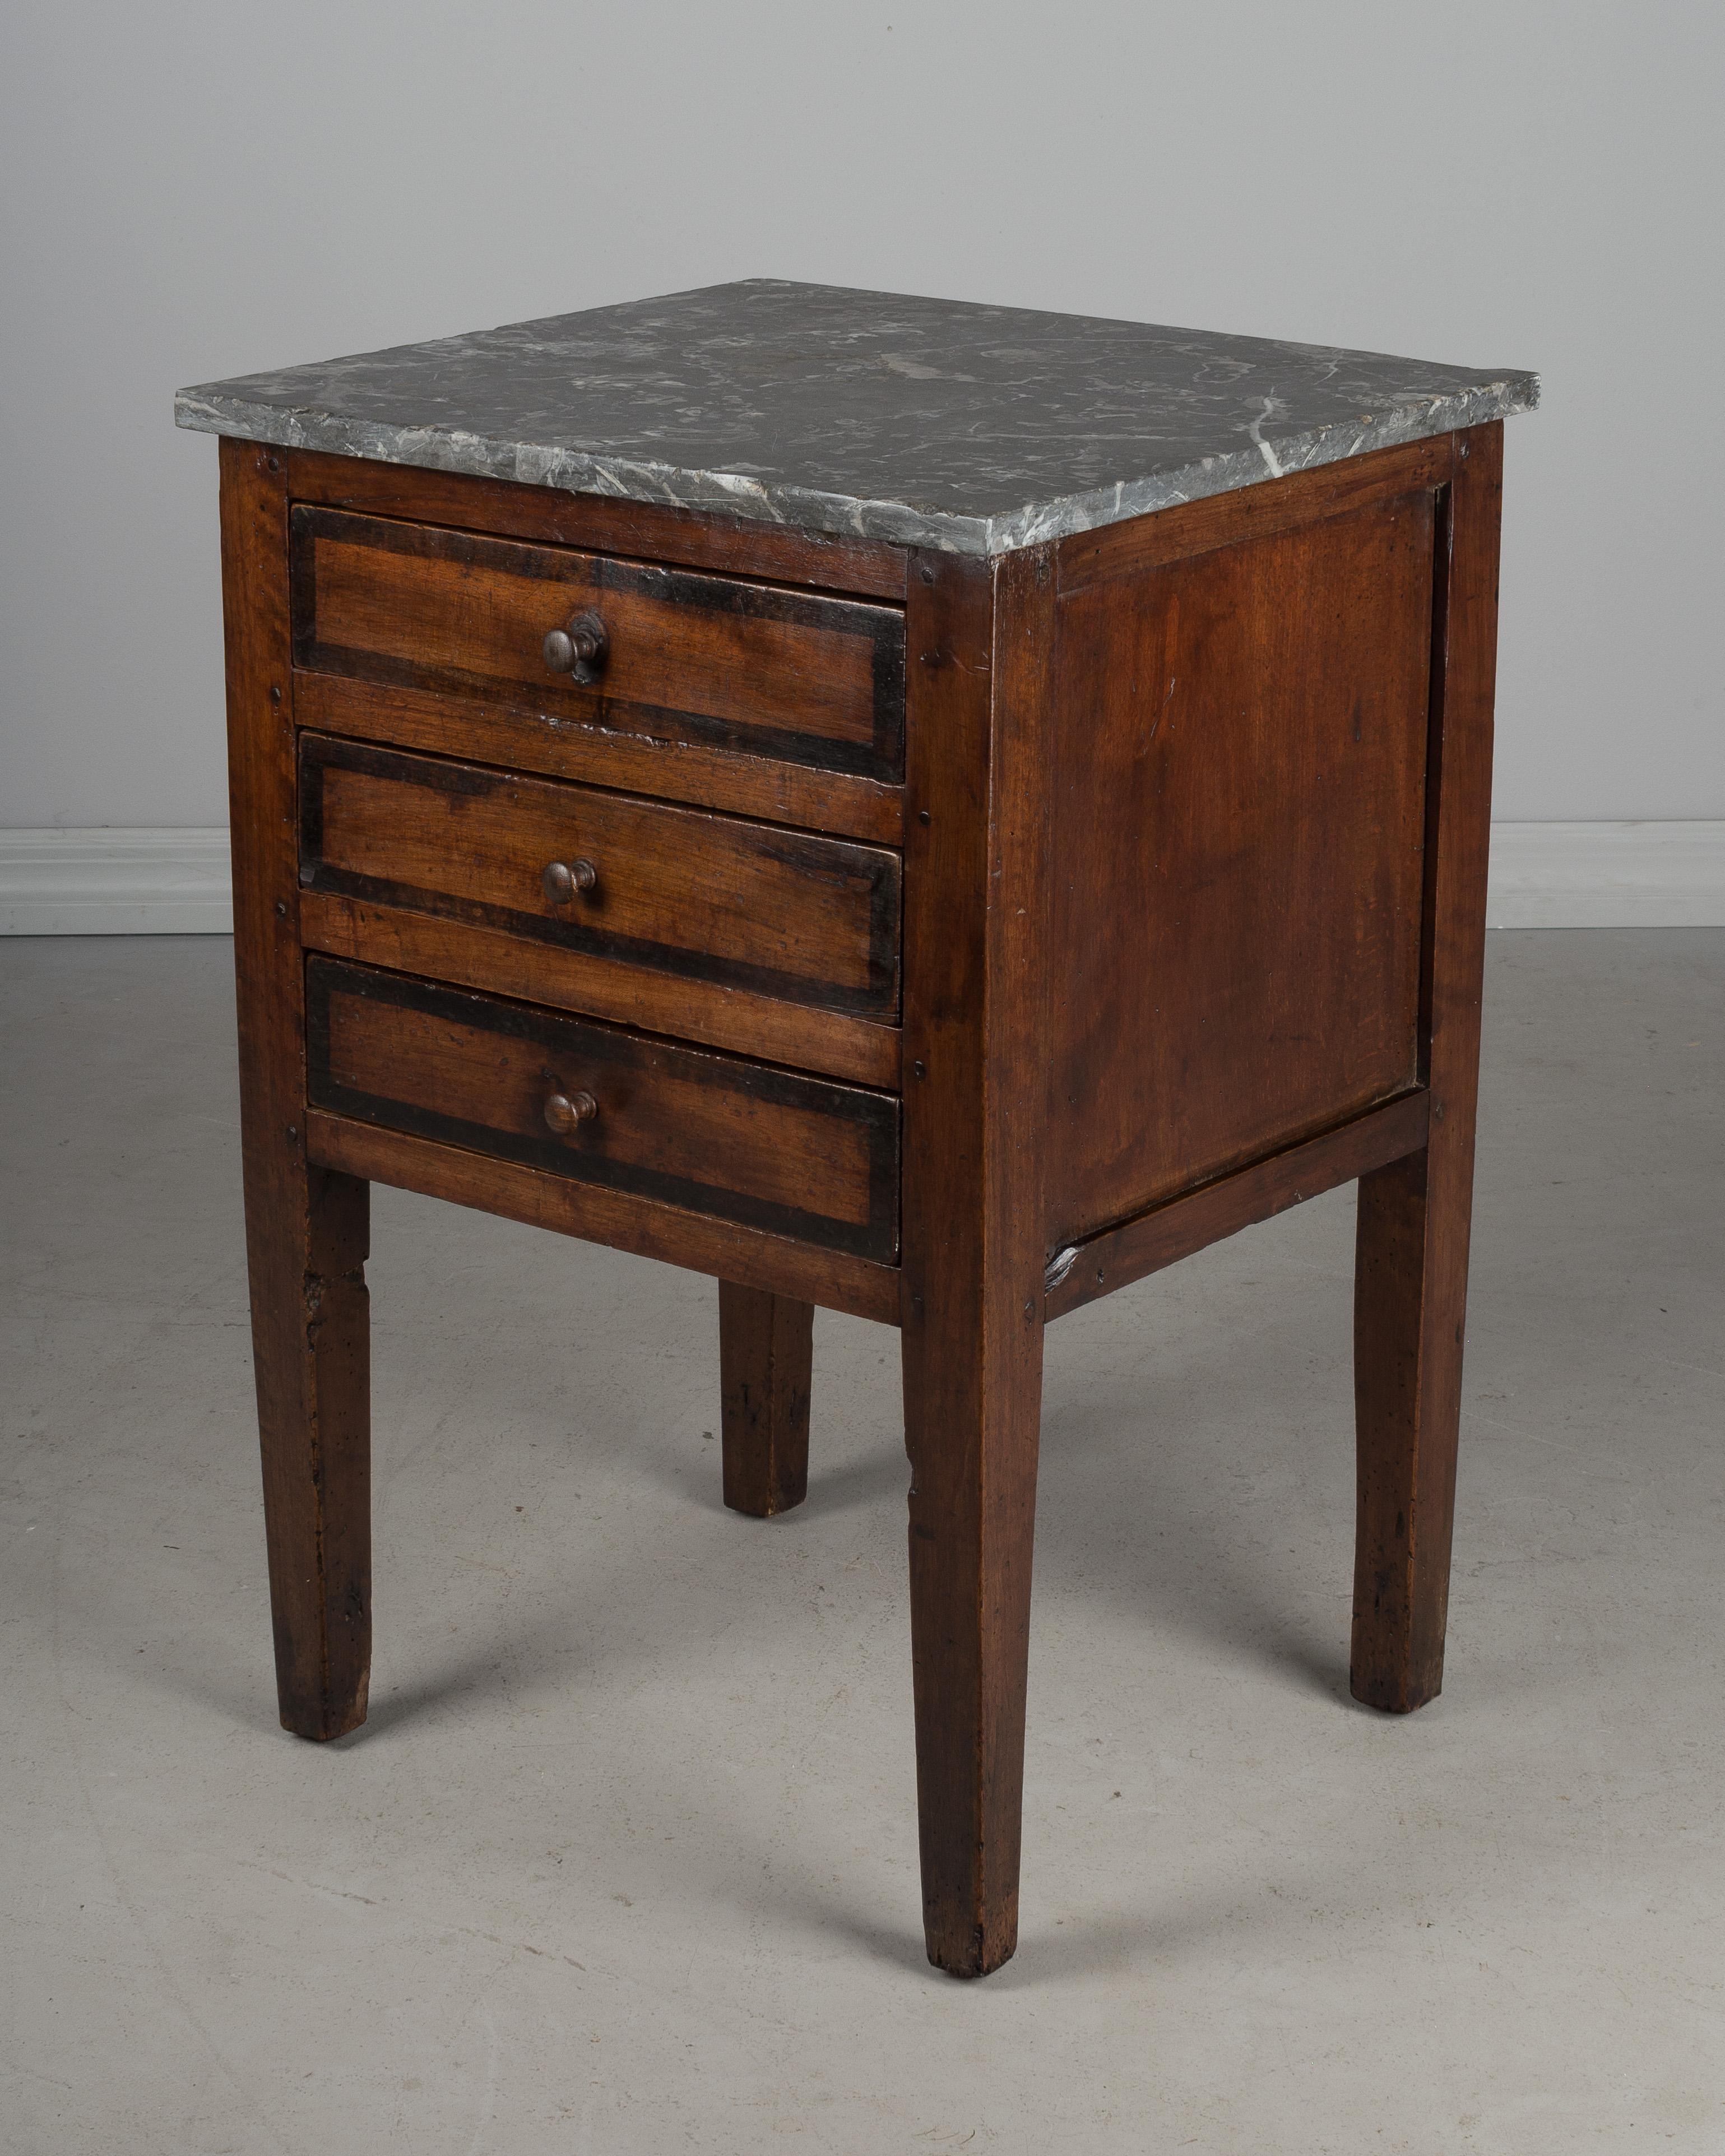 An early 19th century Country French side table made of solid walnut and finished on all four sides. Three dovetailed drawers with replaced wooded knobs. Original grey marble top is not attached. There are a few chips to the edges of the marble.